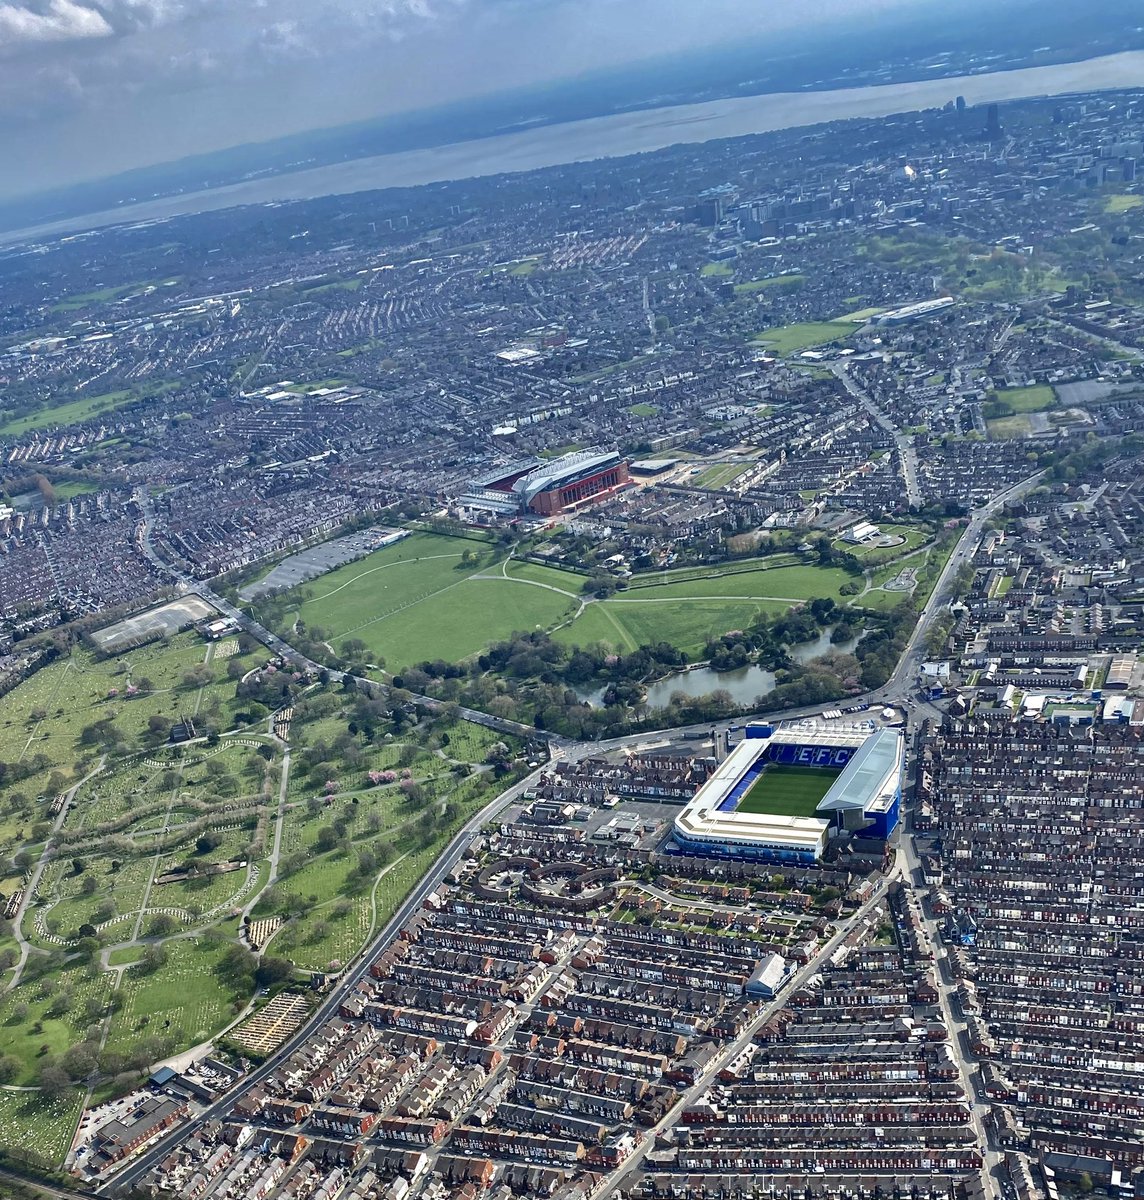 Liverpool, Anfield and Everton fly over .
#Liverpool #Seaforth #Everton #Aerialphotos